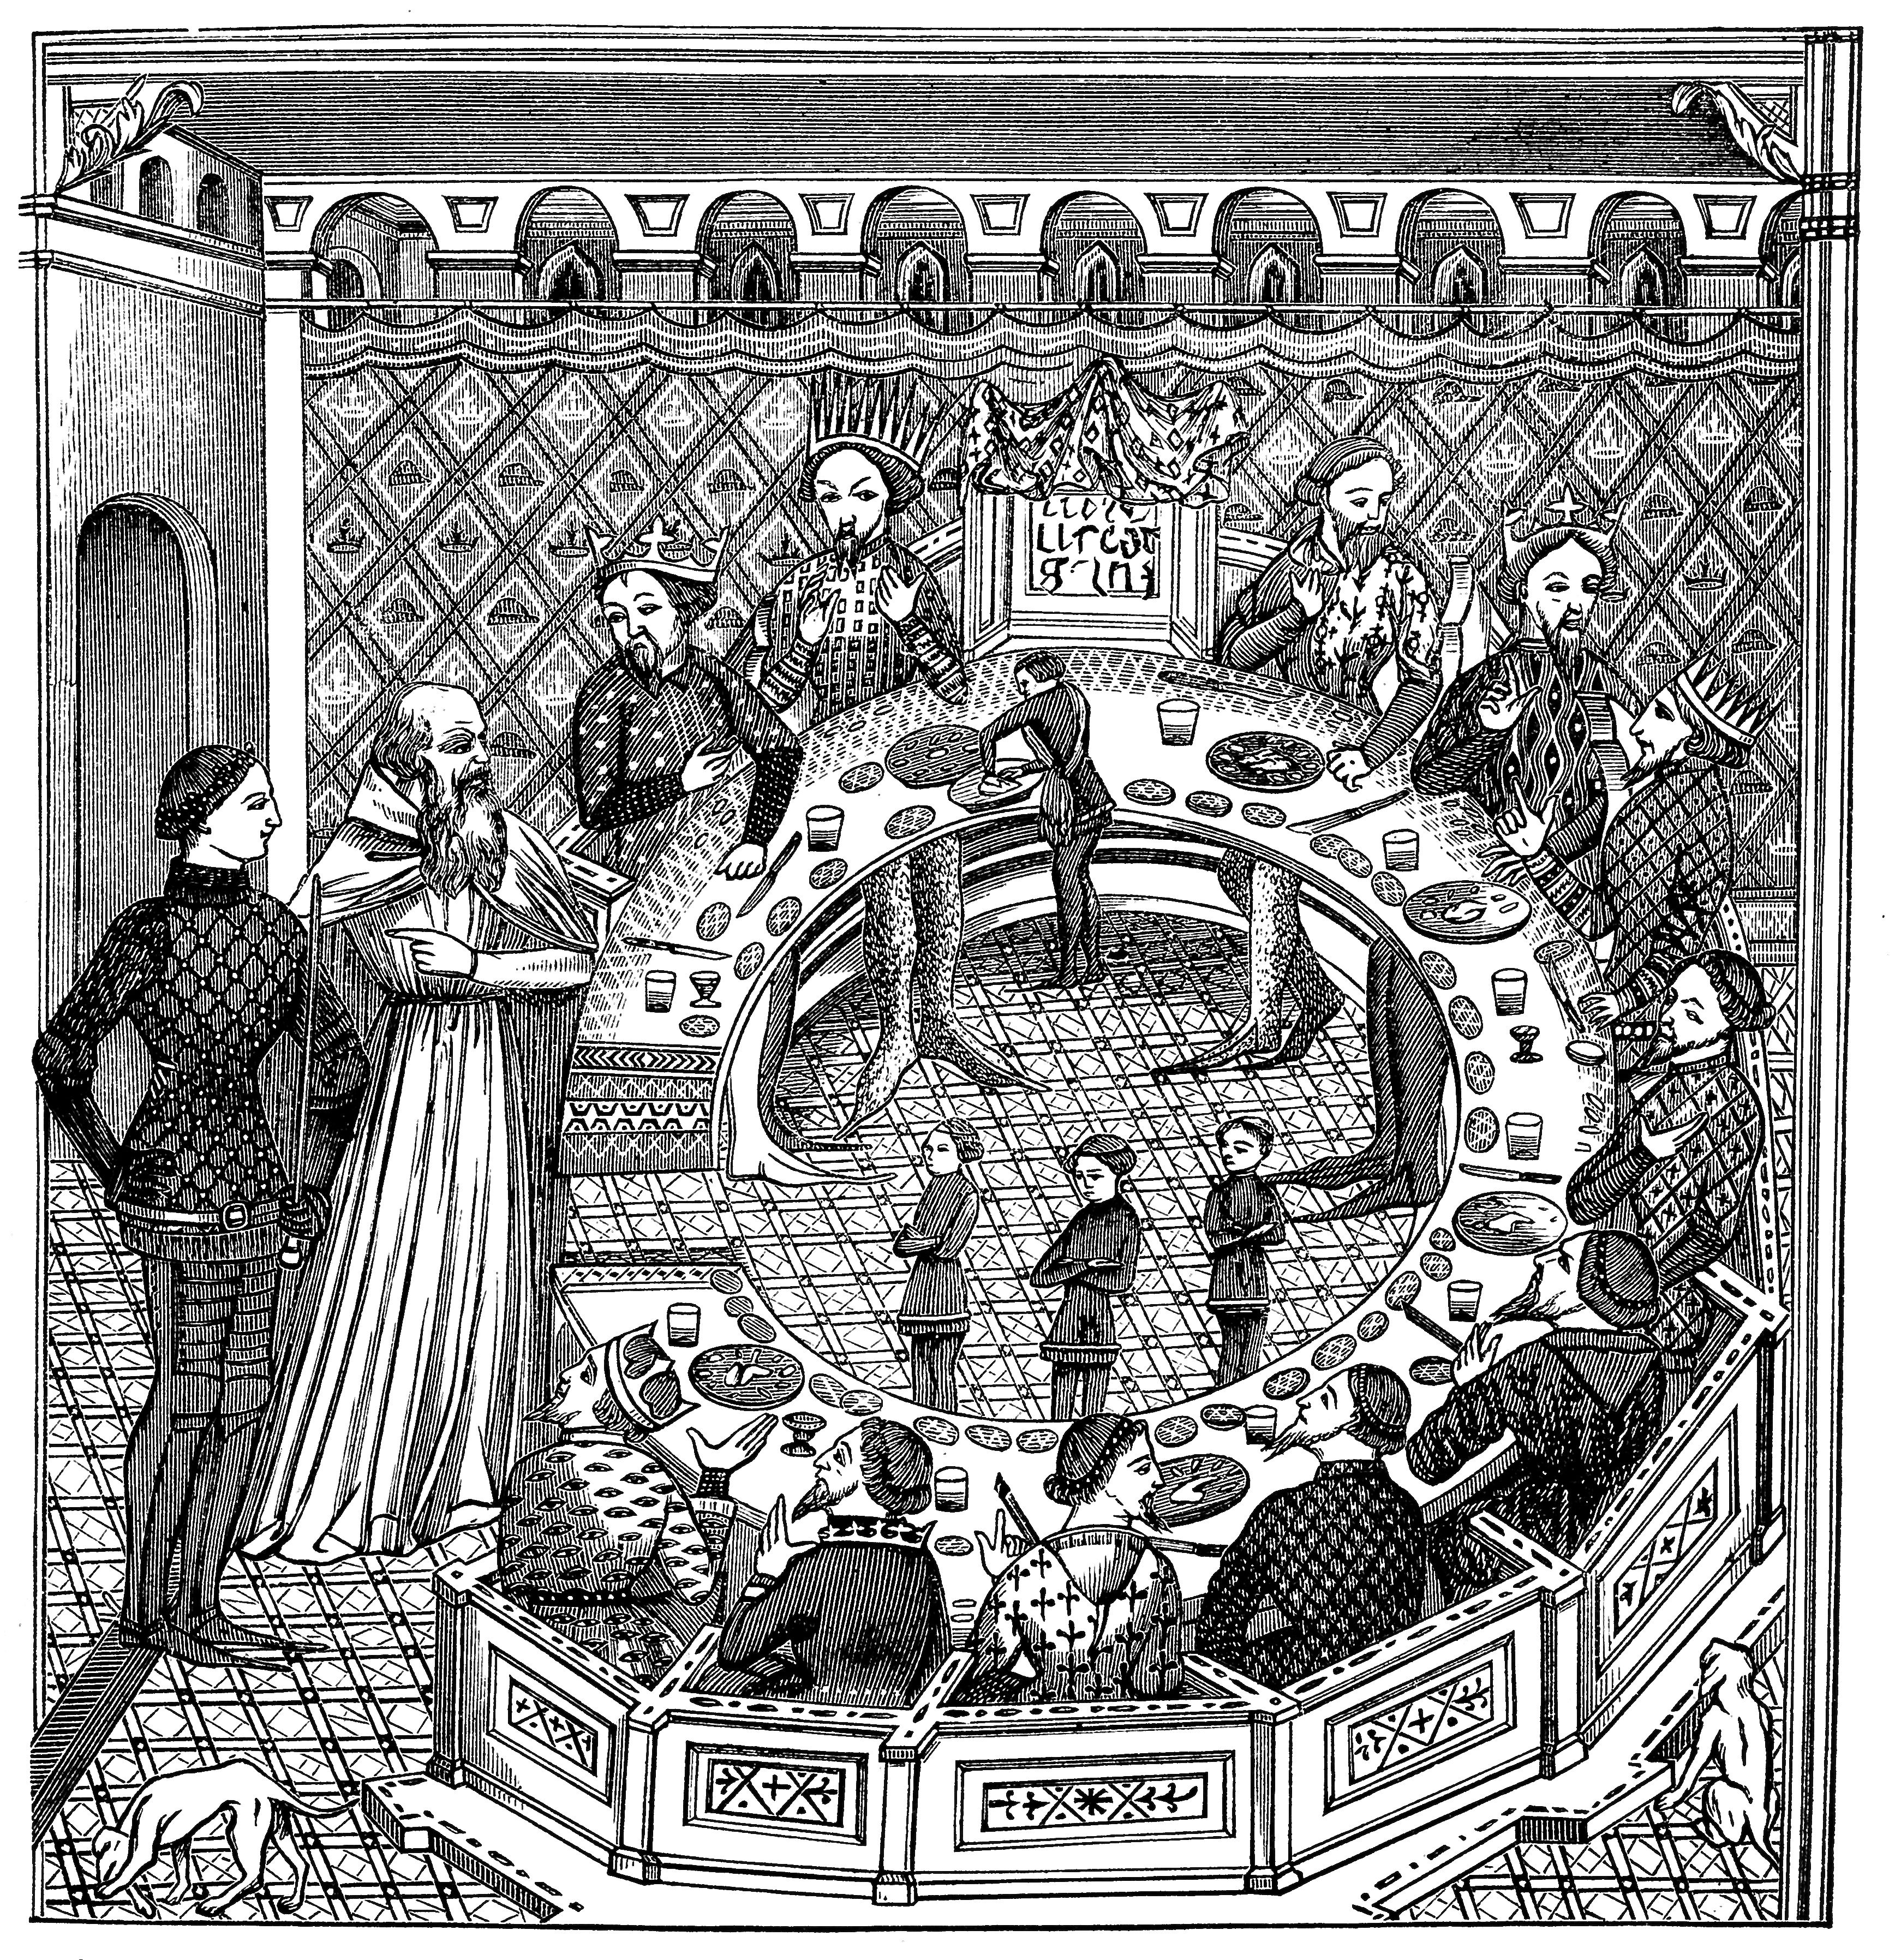 Illustration of a King Arthur and his Round Table